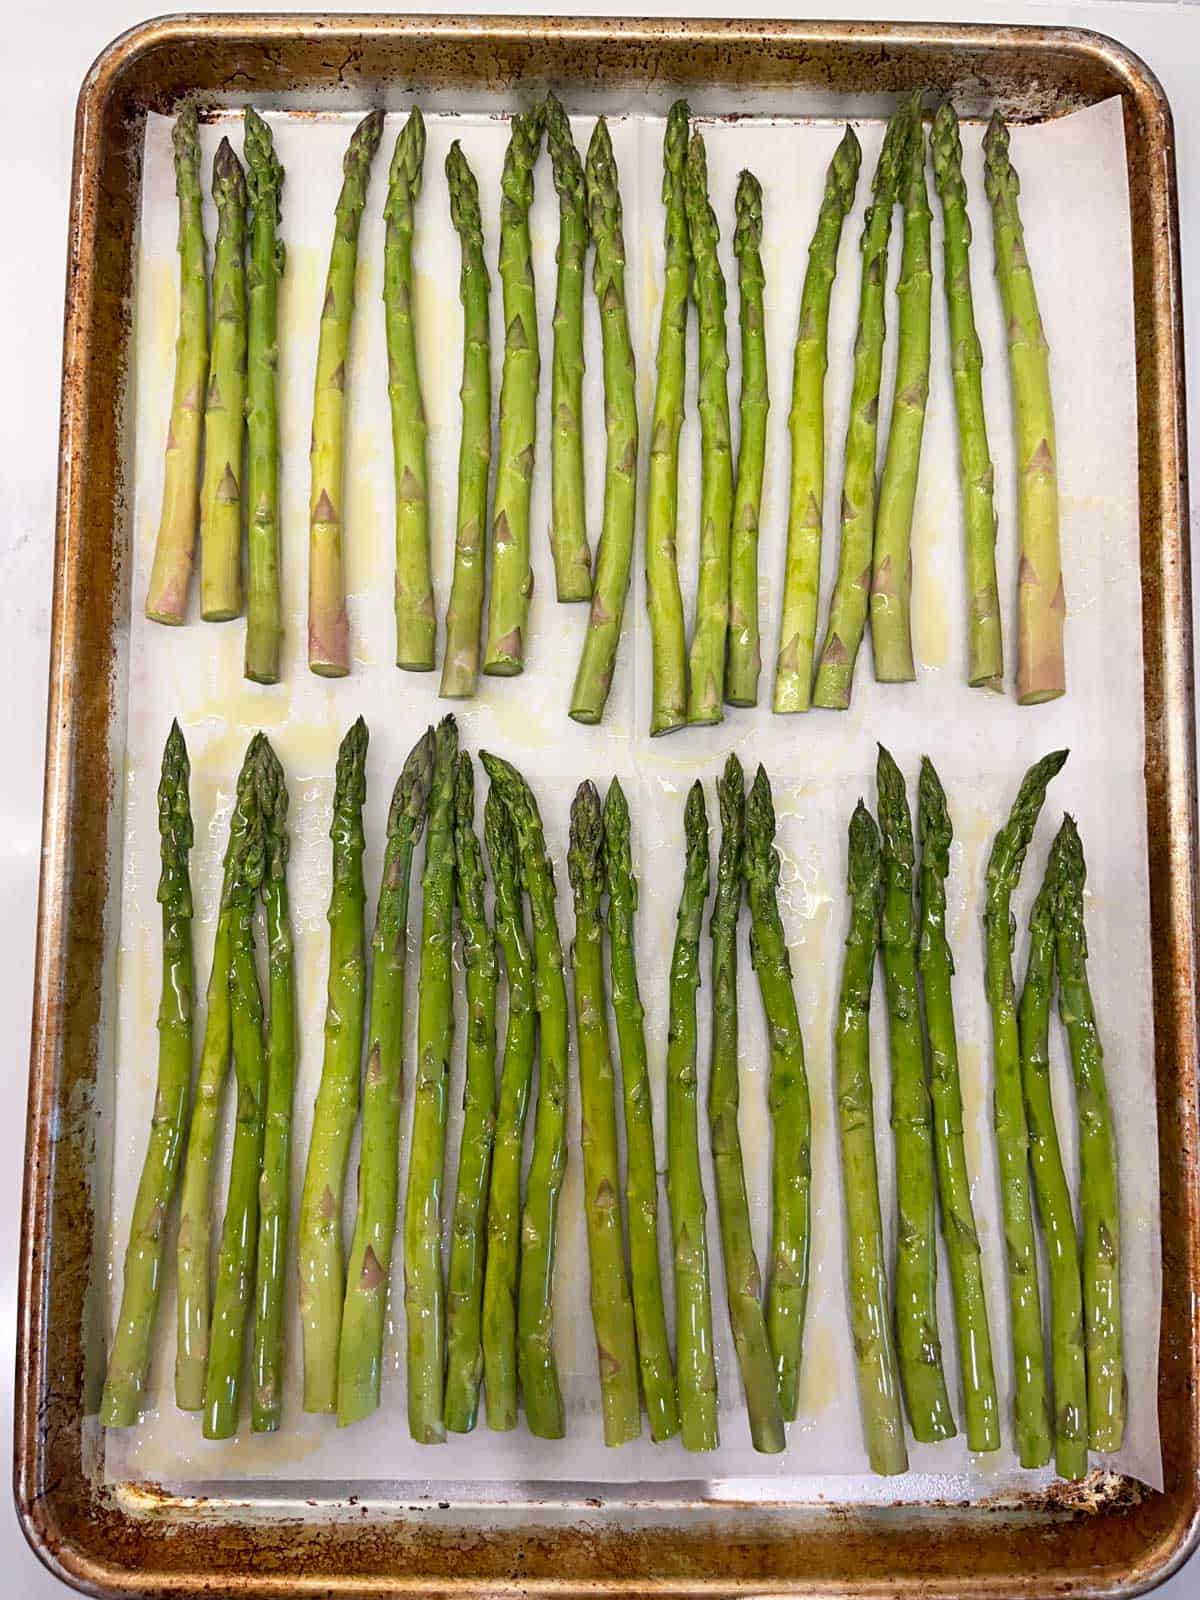 Asparagus spears are coated in olive oil.